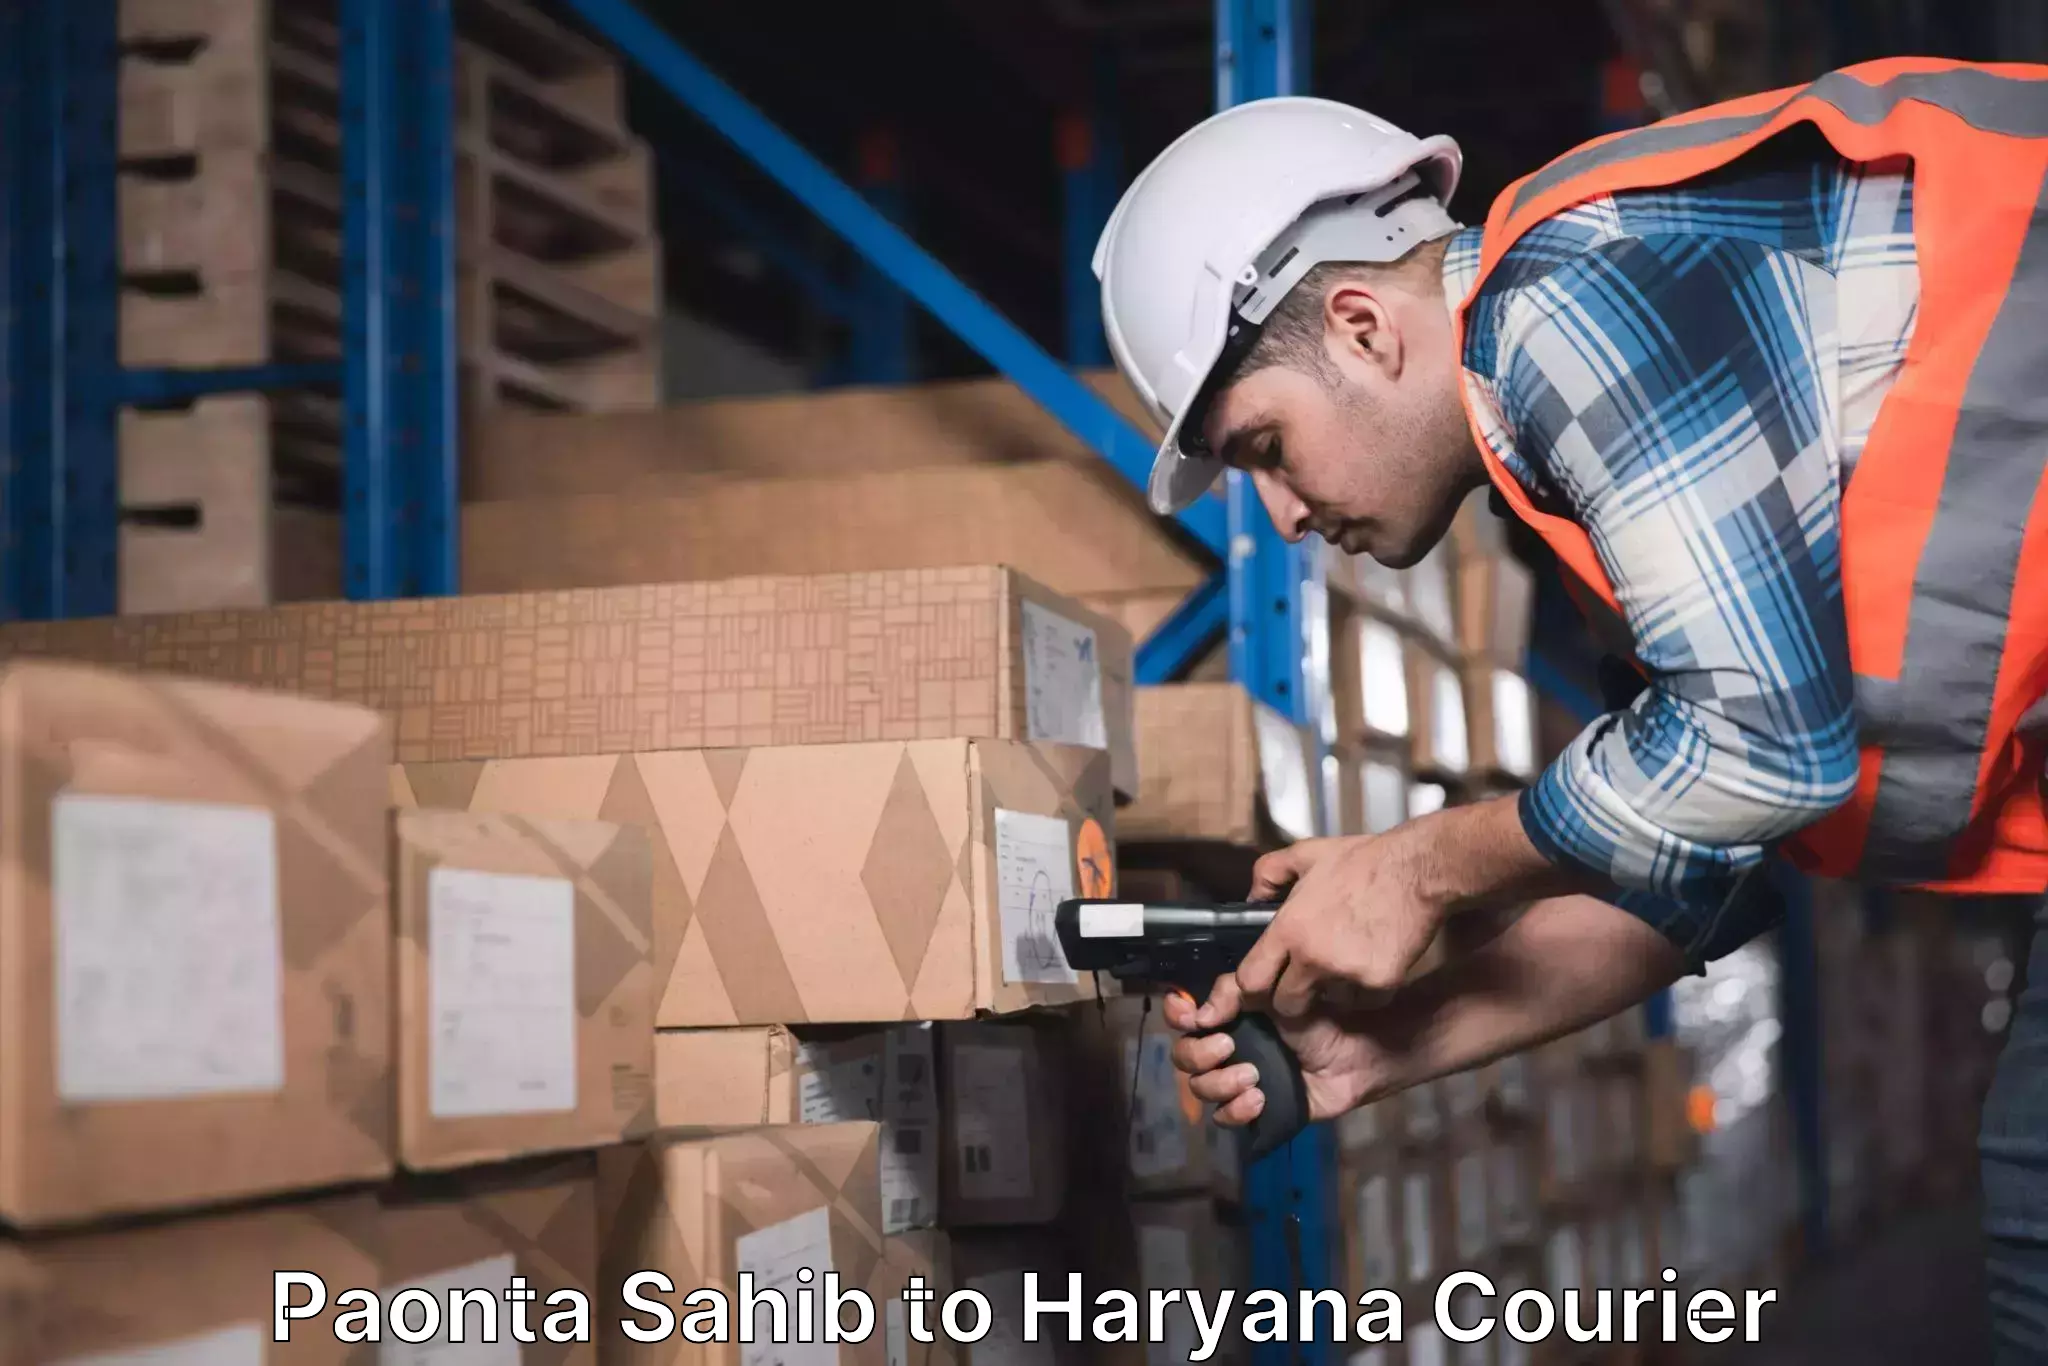 Large-scale shipping solutions Paonta Sahib to Bilaspur Haryana